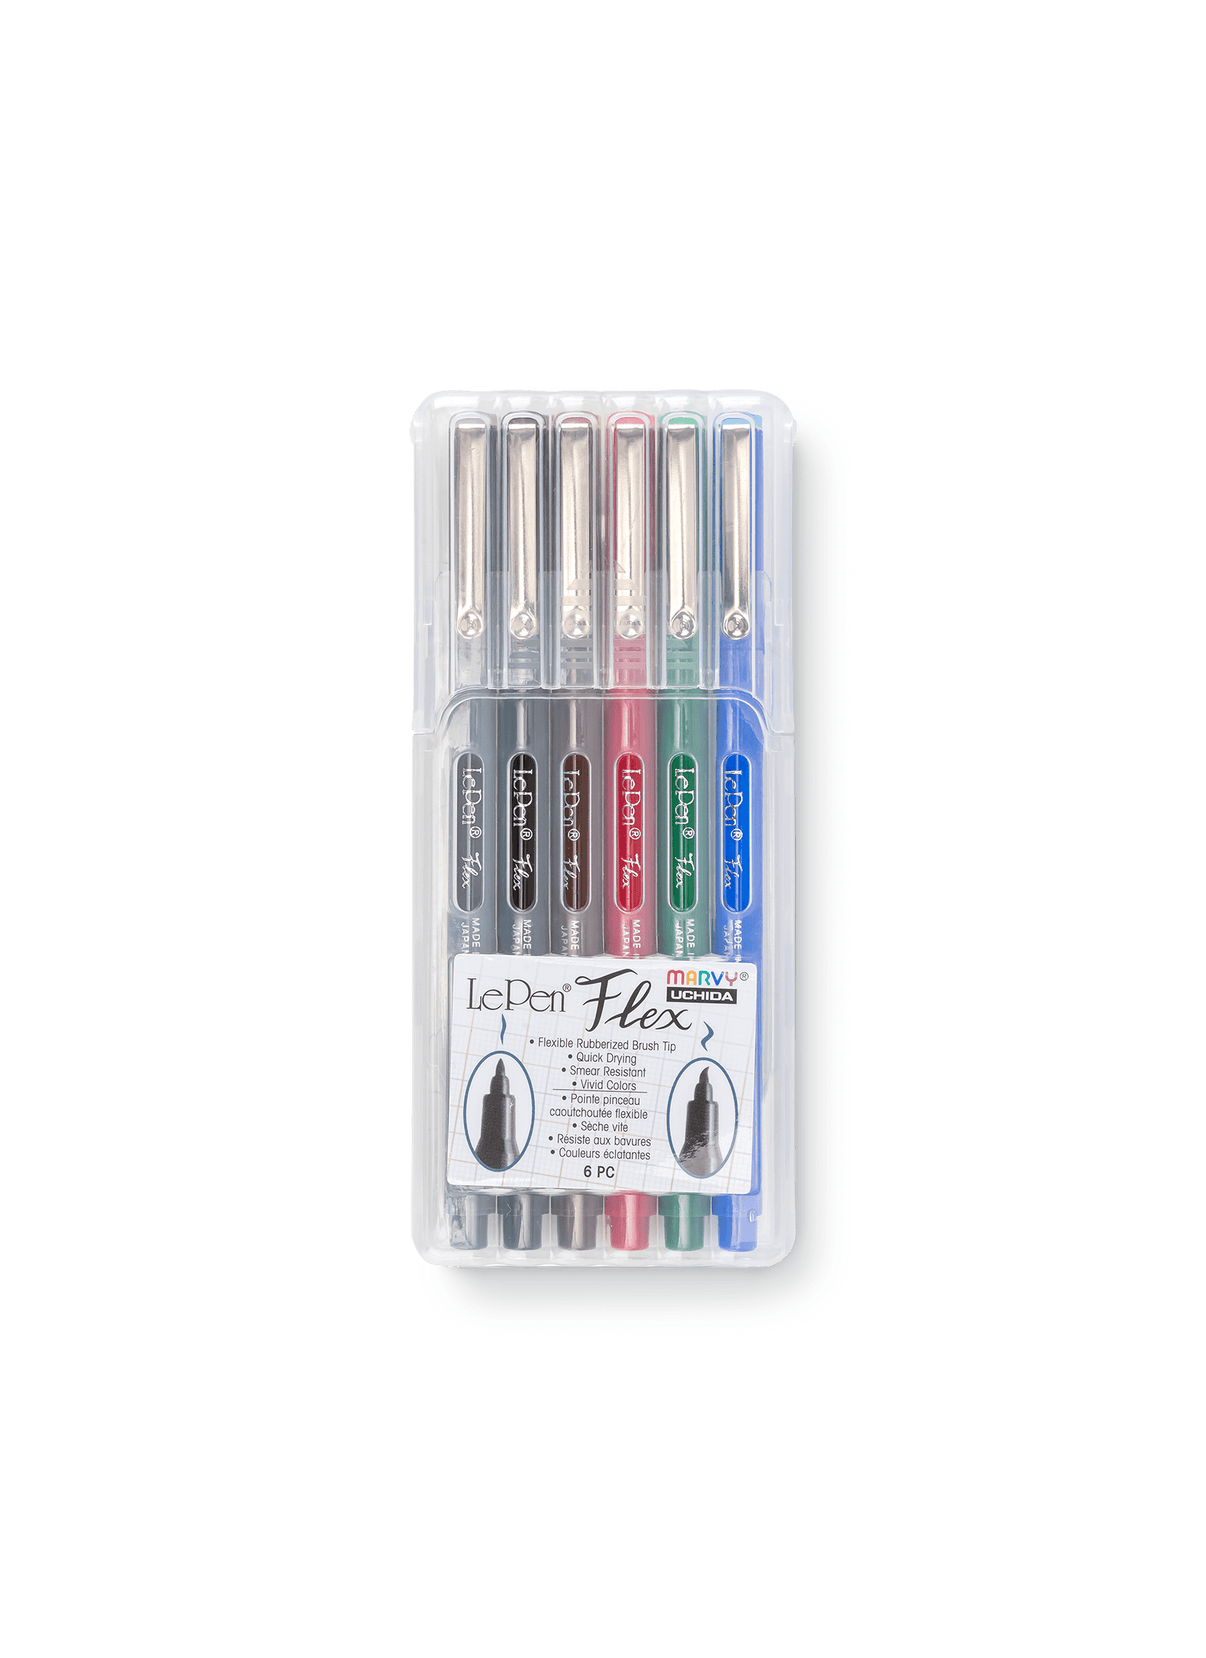 Le Pen Primary Flex Set with a case, including Blue, Green, Red, Brown, Black, and Dark Gray